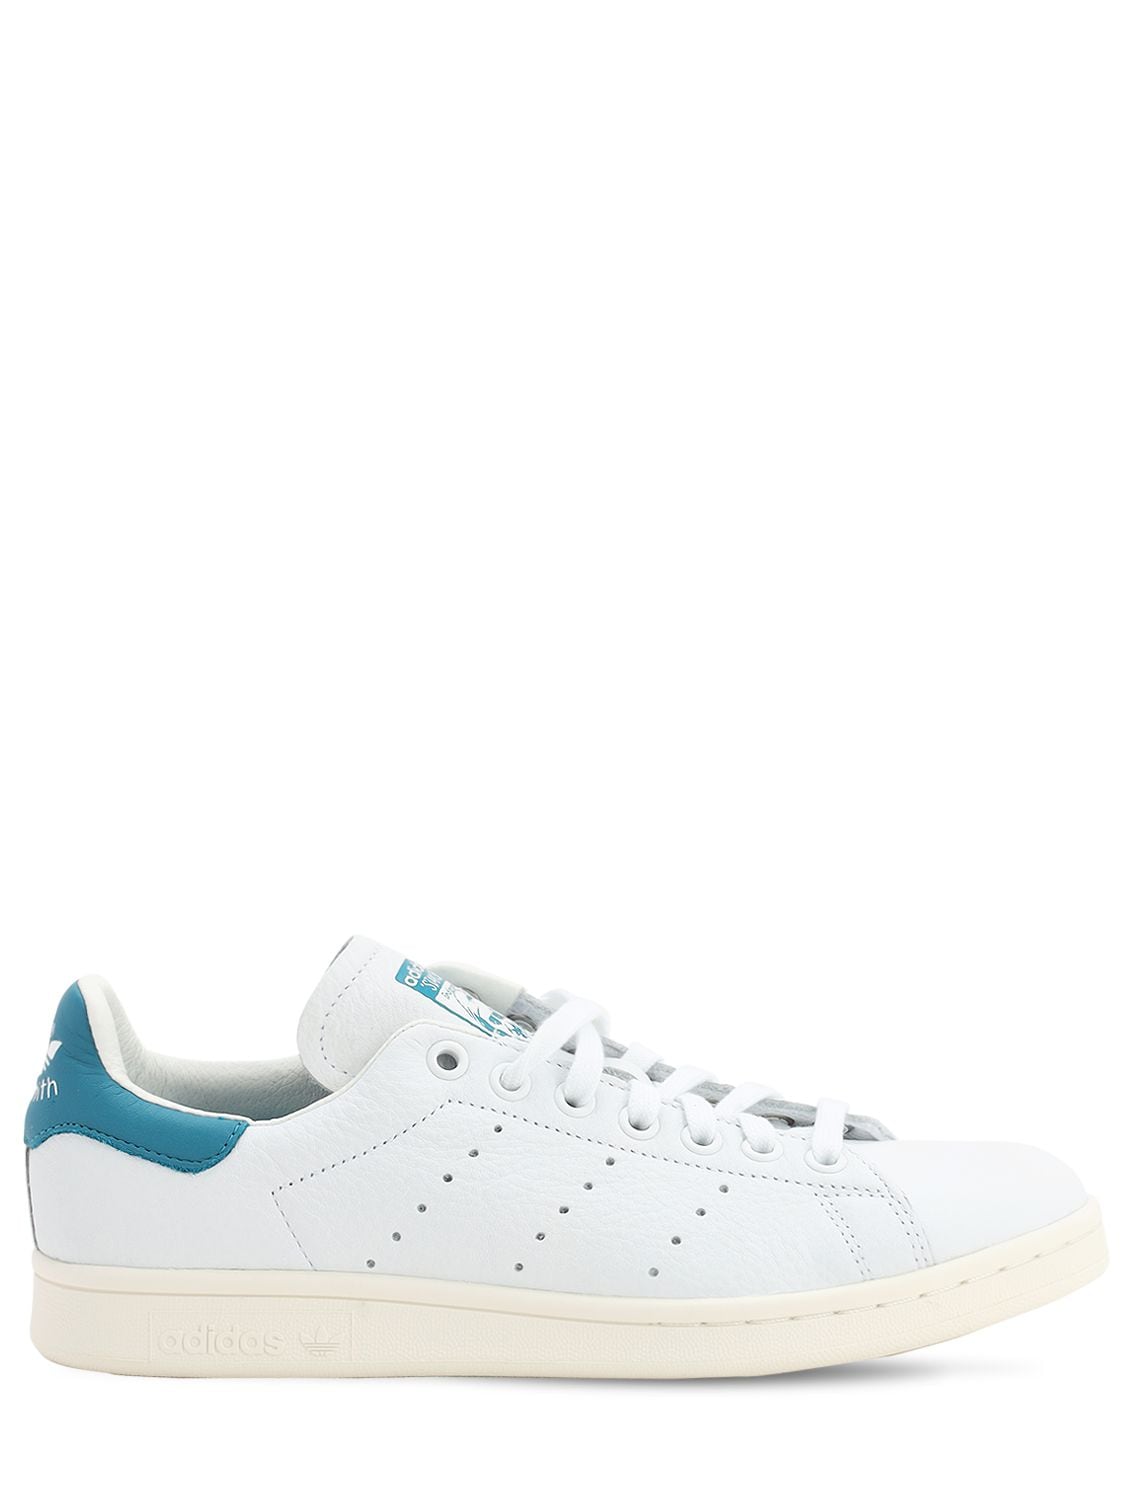 ADIDAS ORIGINALS STAN SMITH LEATHER SNEAKERS,70IWAN008-V0HJVEU1